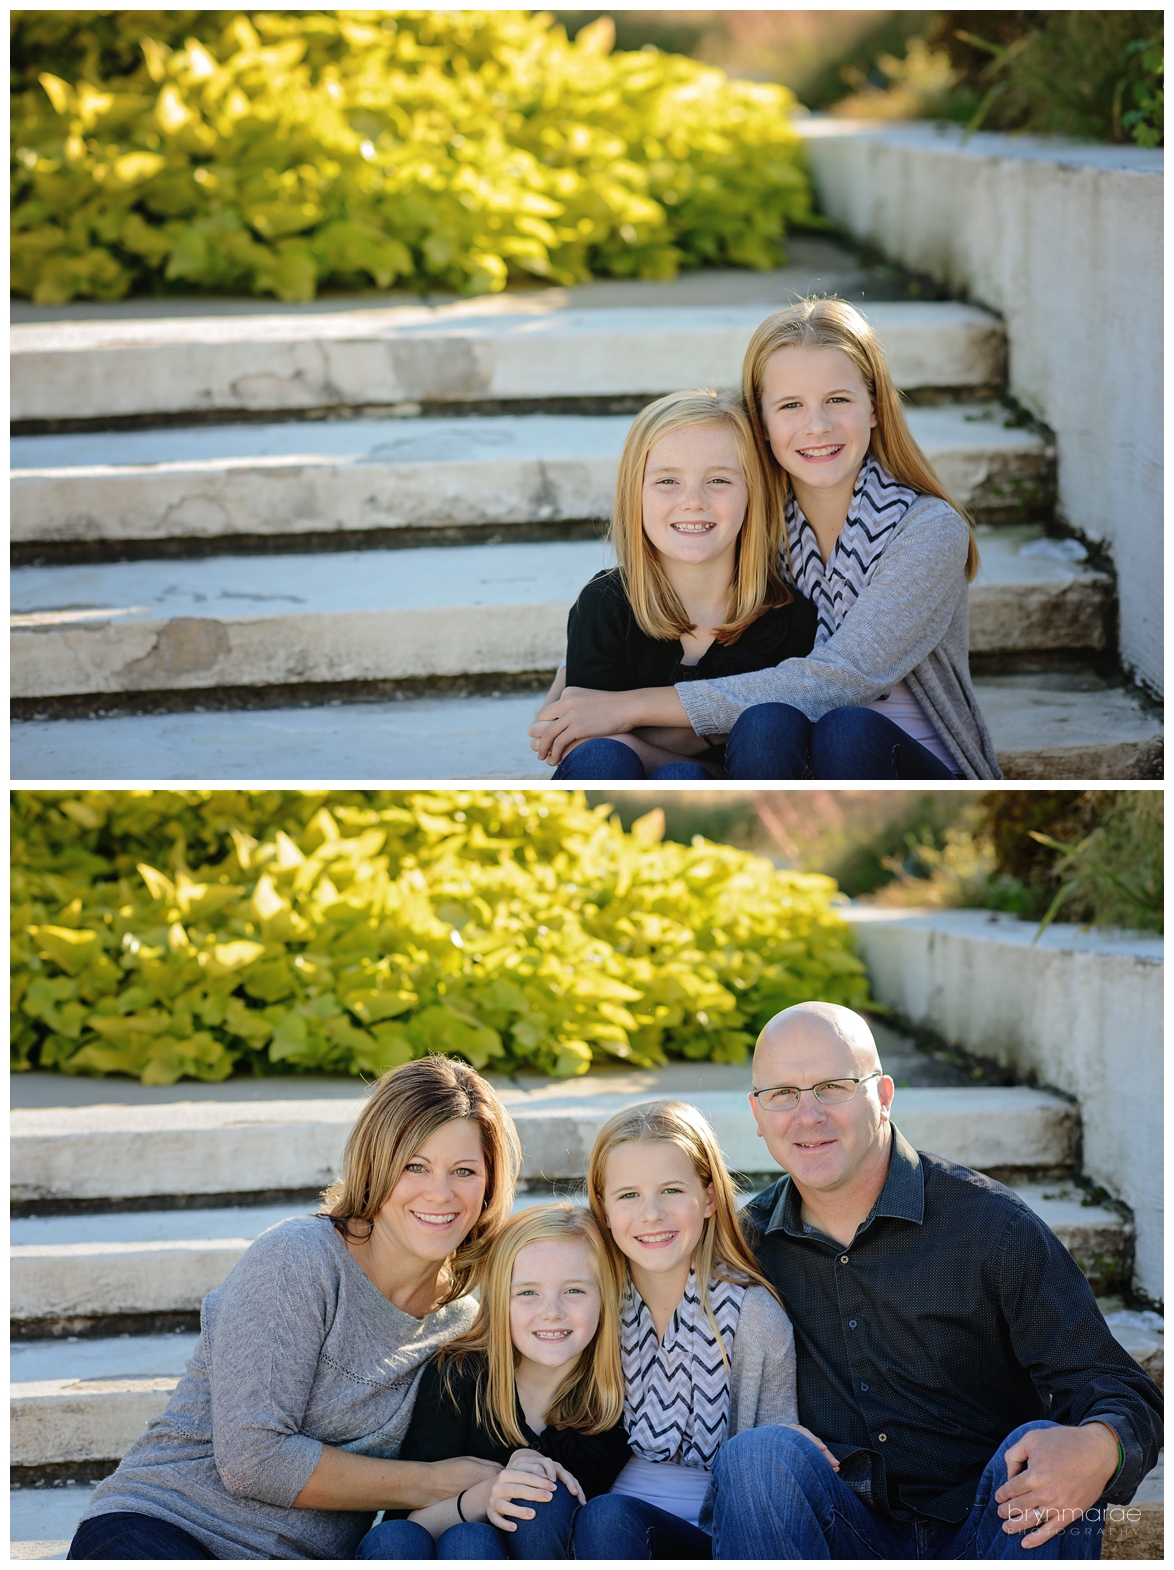 blythe-des-moines-family-photography-109-Edit